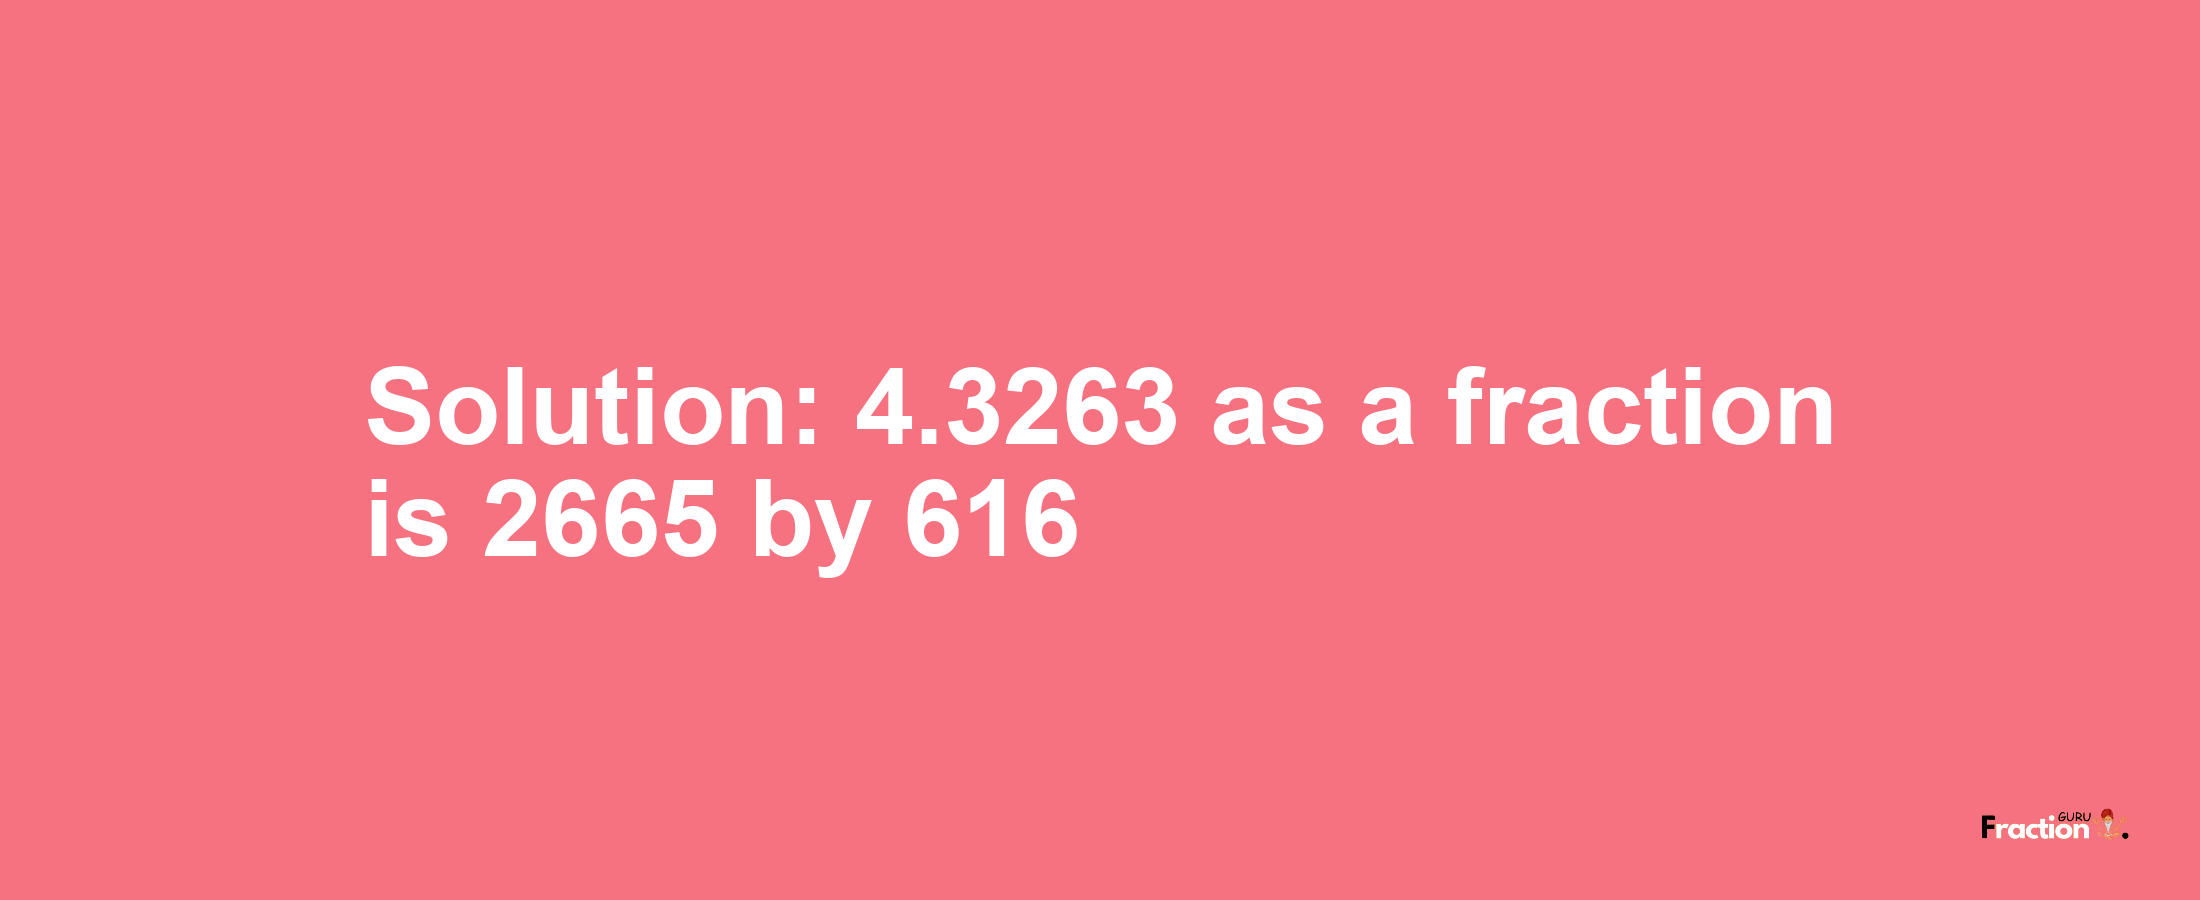 Solution:4.3263 as a fraction is 2665/616